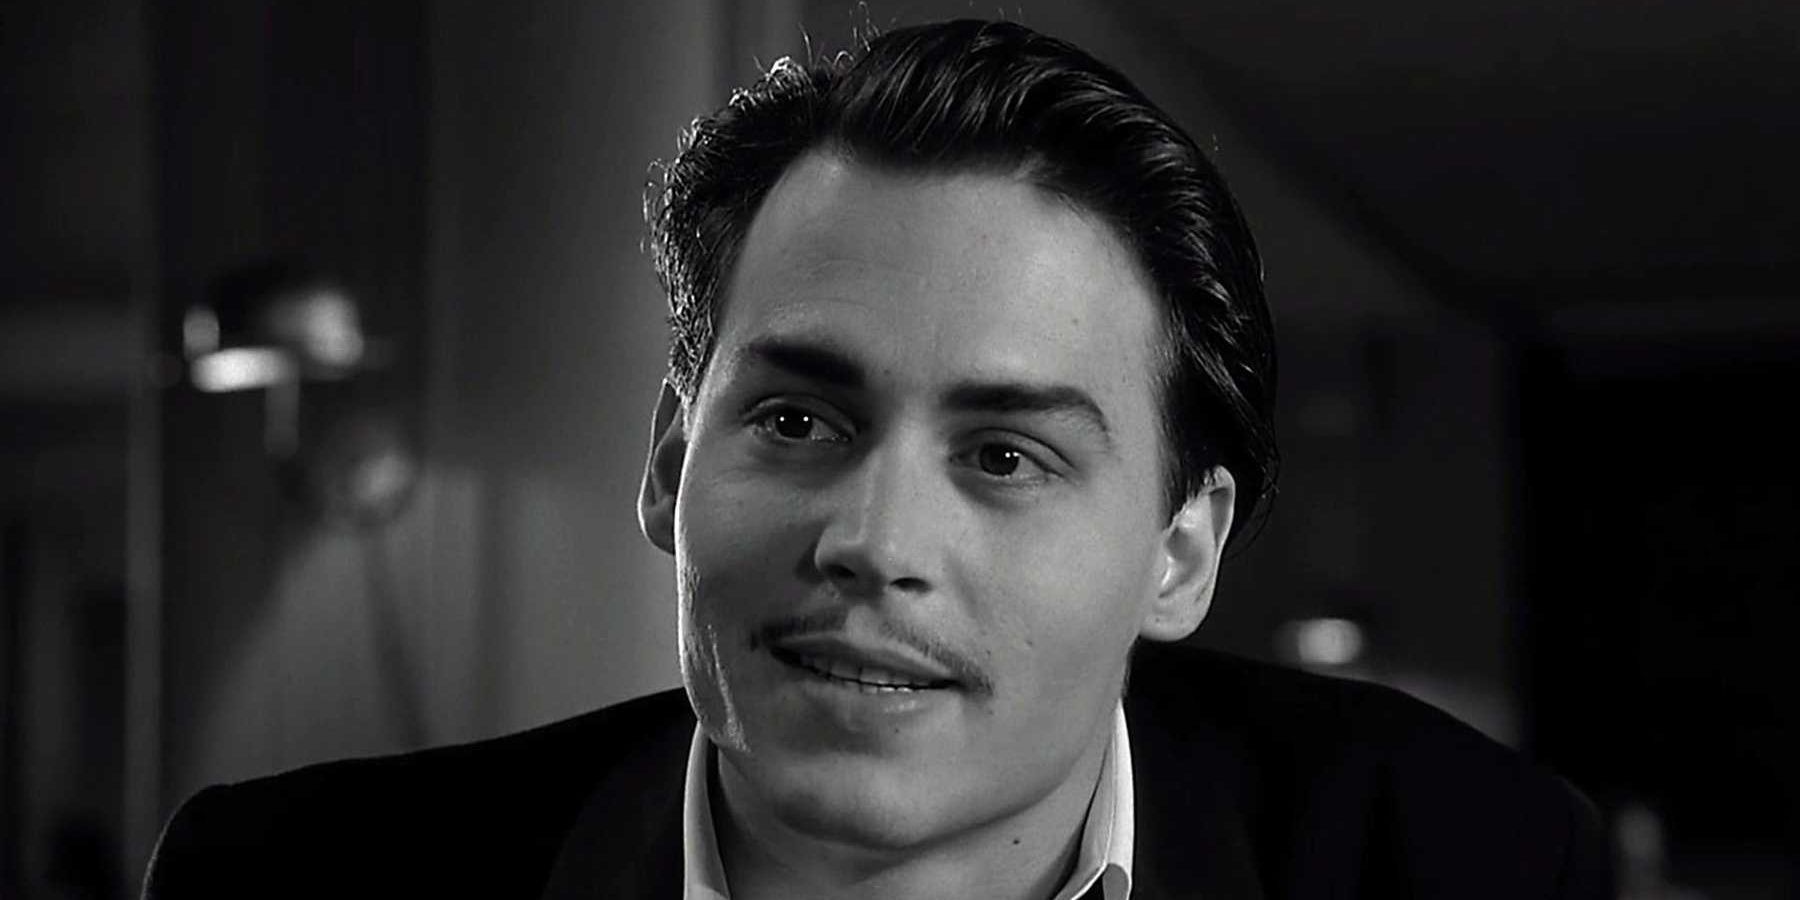 Ed Wood played by Johnny Depp smiling black and white